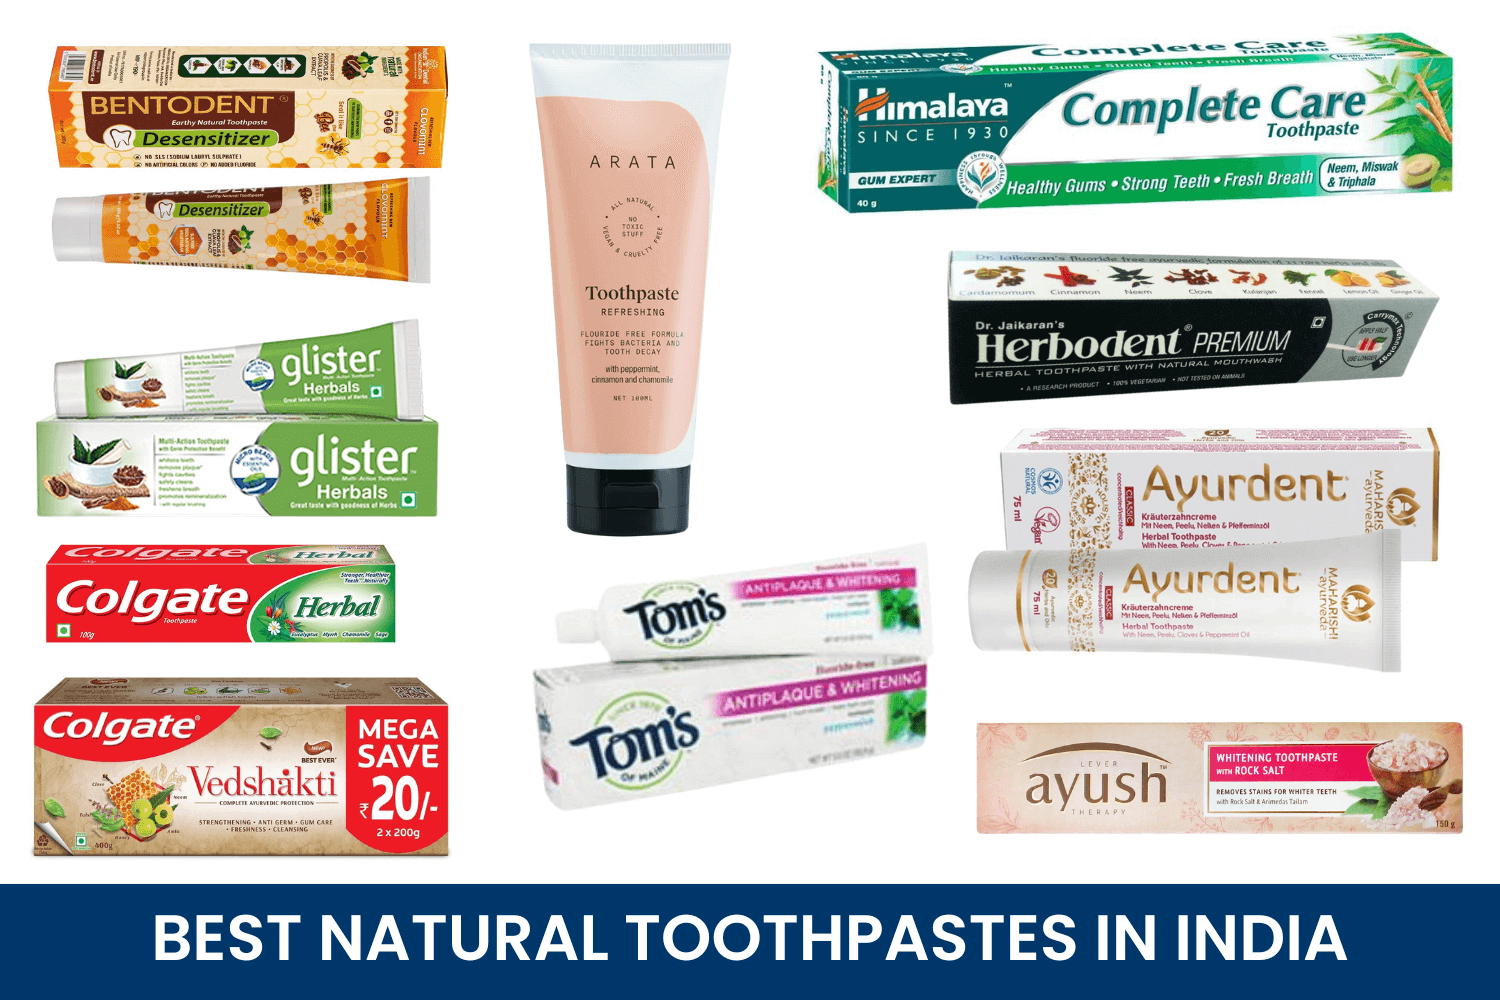 BEST NATURAL TOOTHPASTES IN INDIA